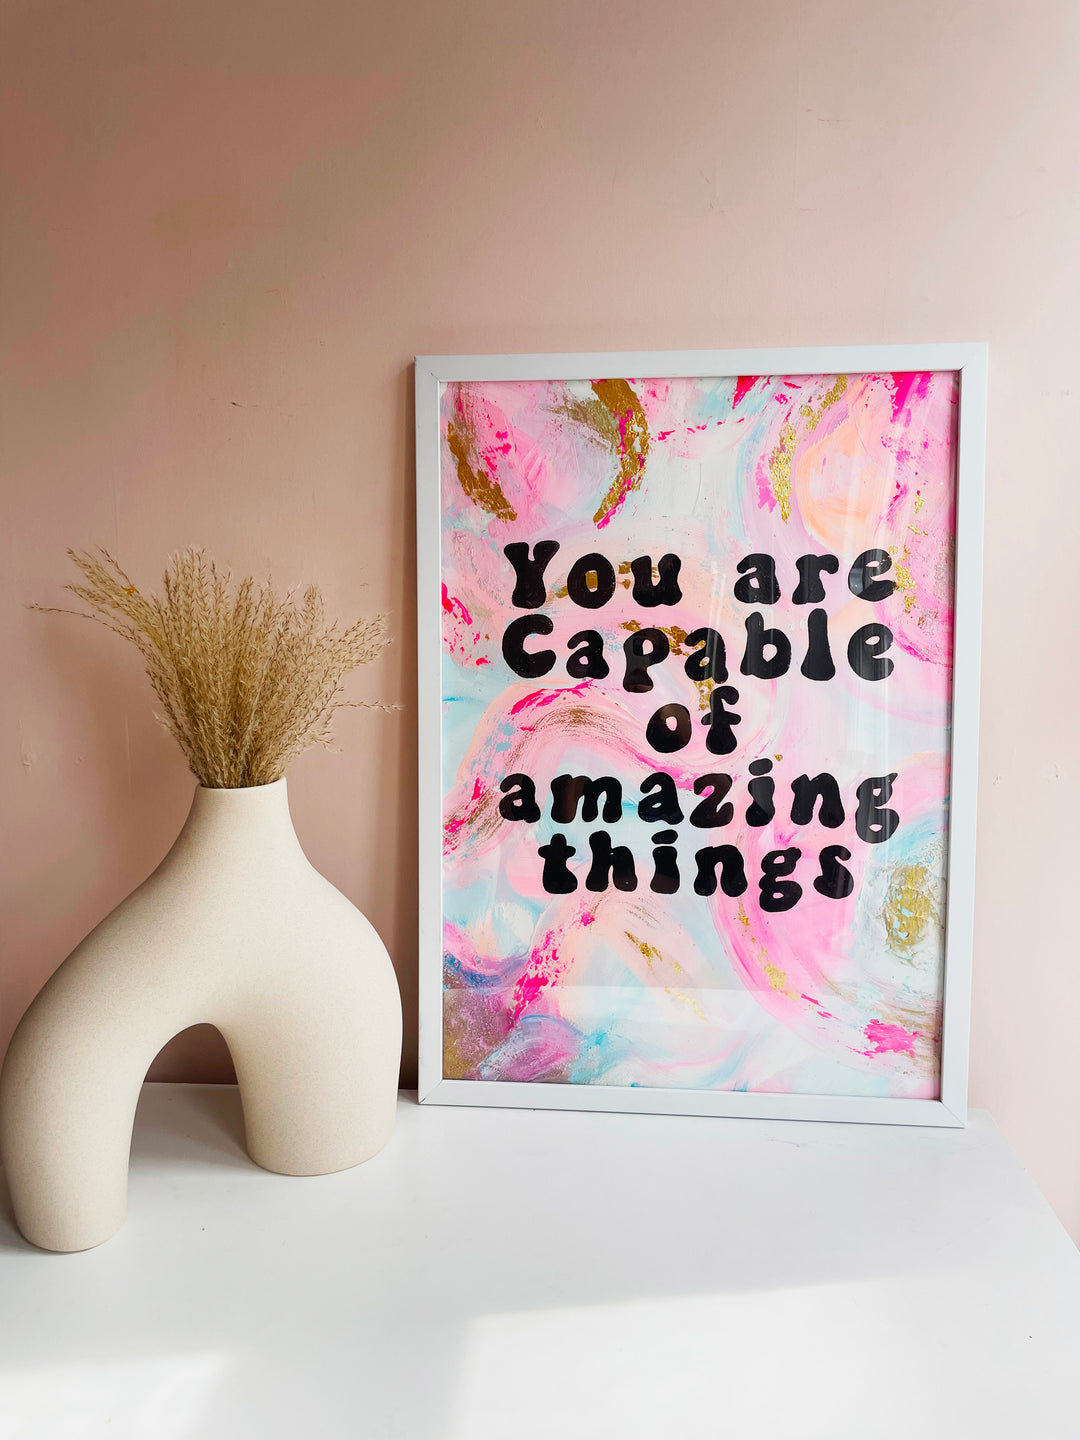 You are capable of magic